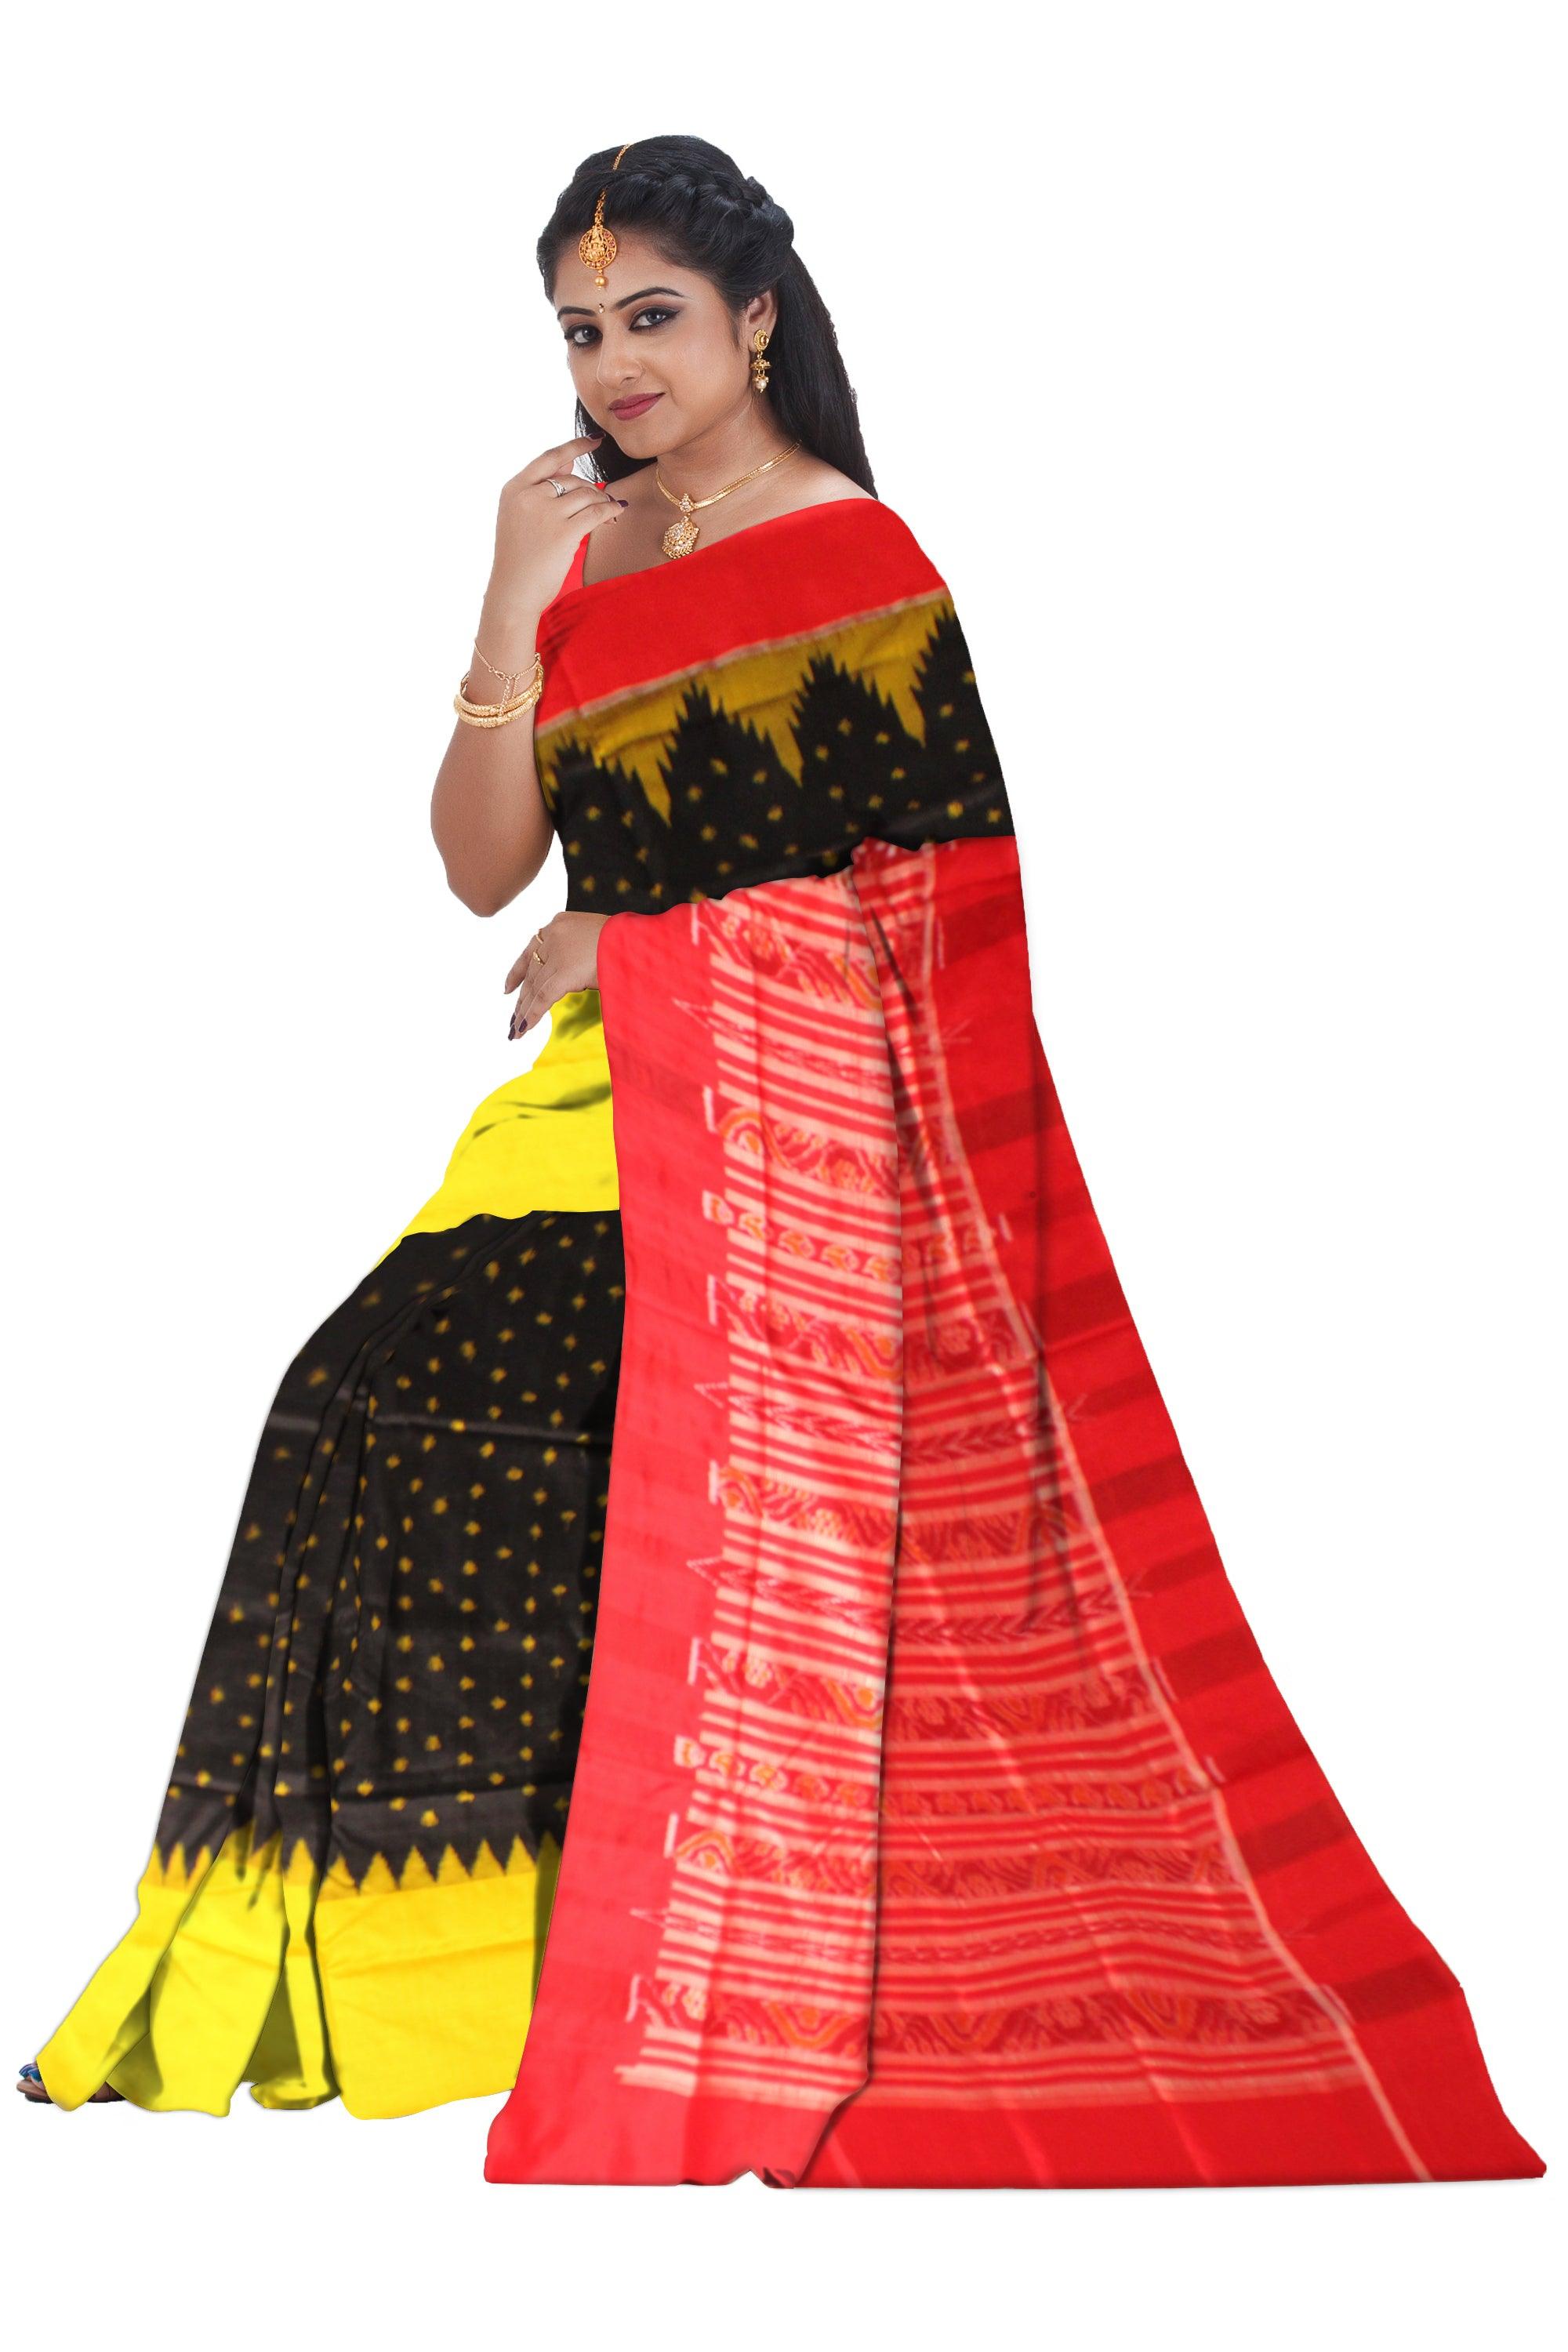 Original Silk Saree in Black color with Yellow dots in Body and Border Yellow and Maroon with blouse piece. - Koshali Arts & Crafts Enterprise